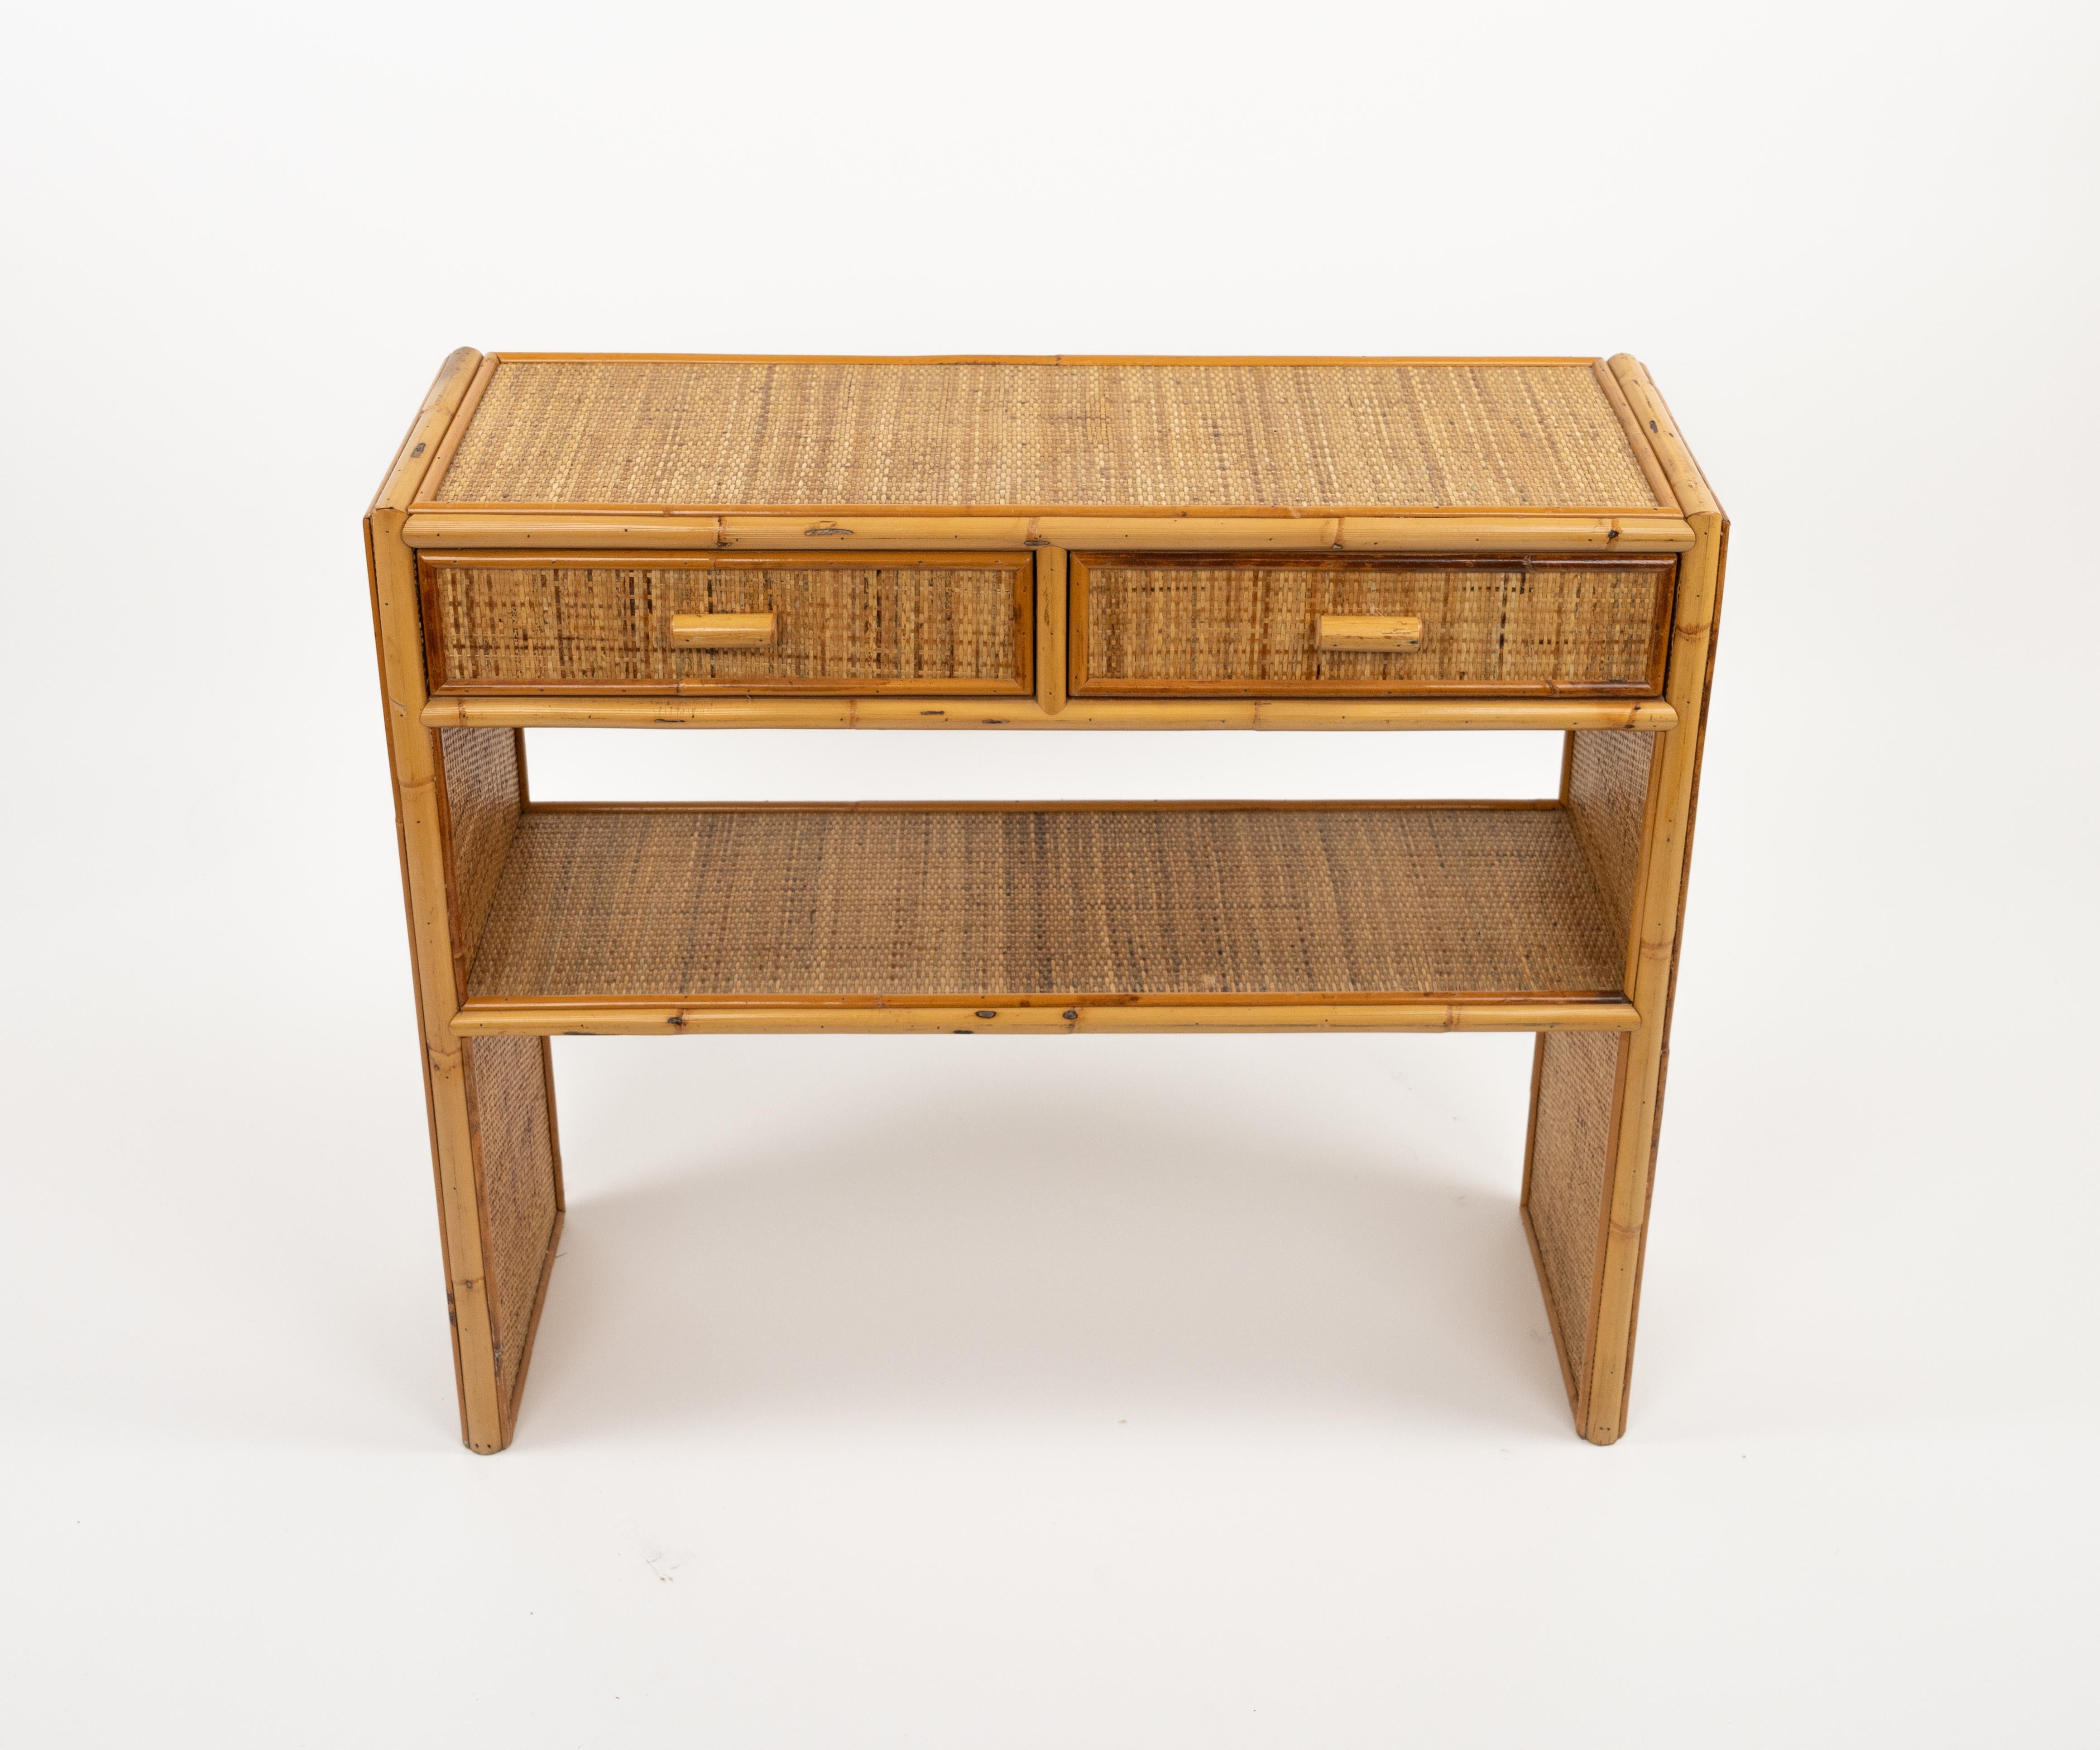 Midcentury Bamboo and Rattan Console Table with Drawers, Italy 1970s For Sale 2